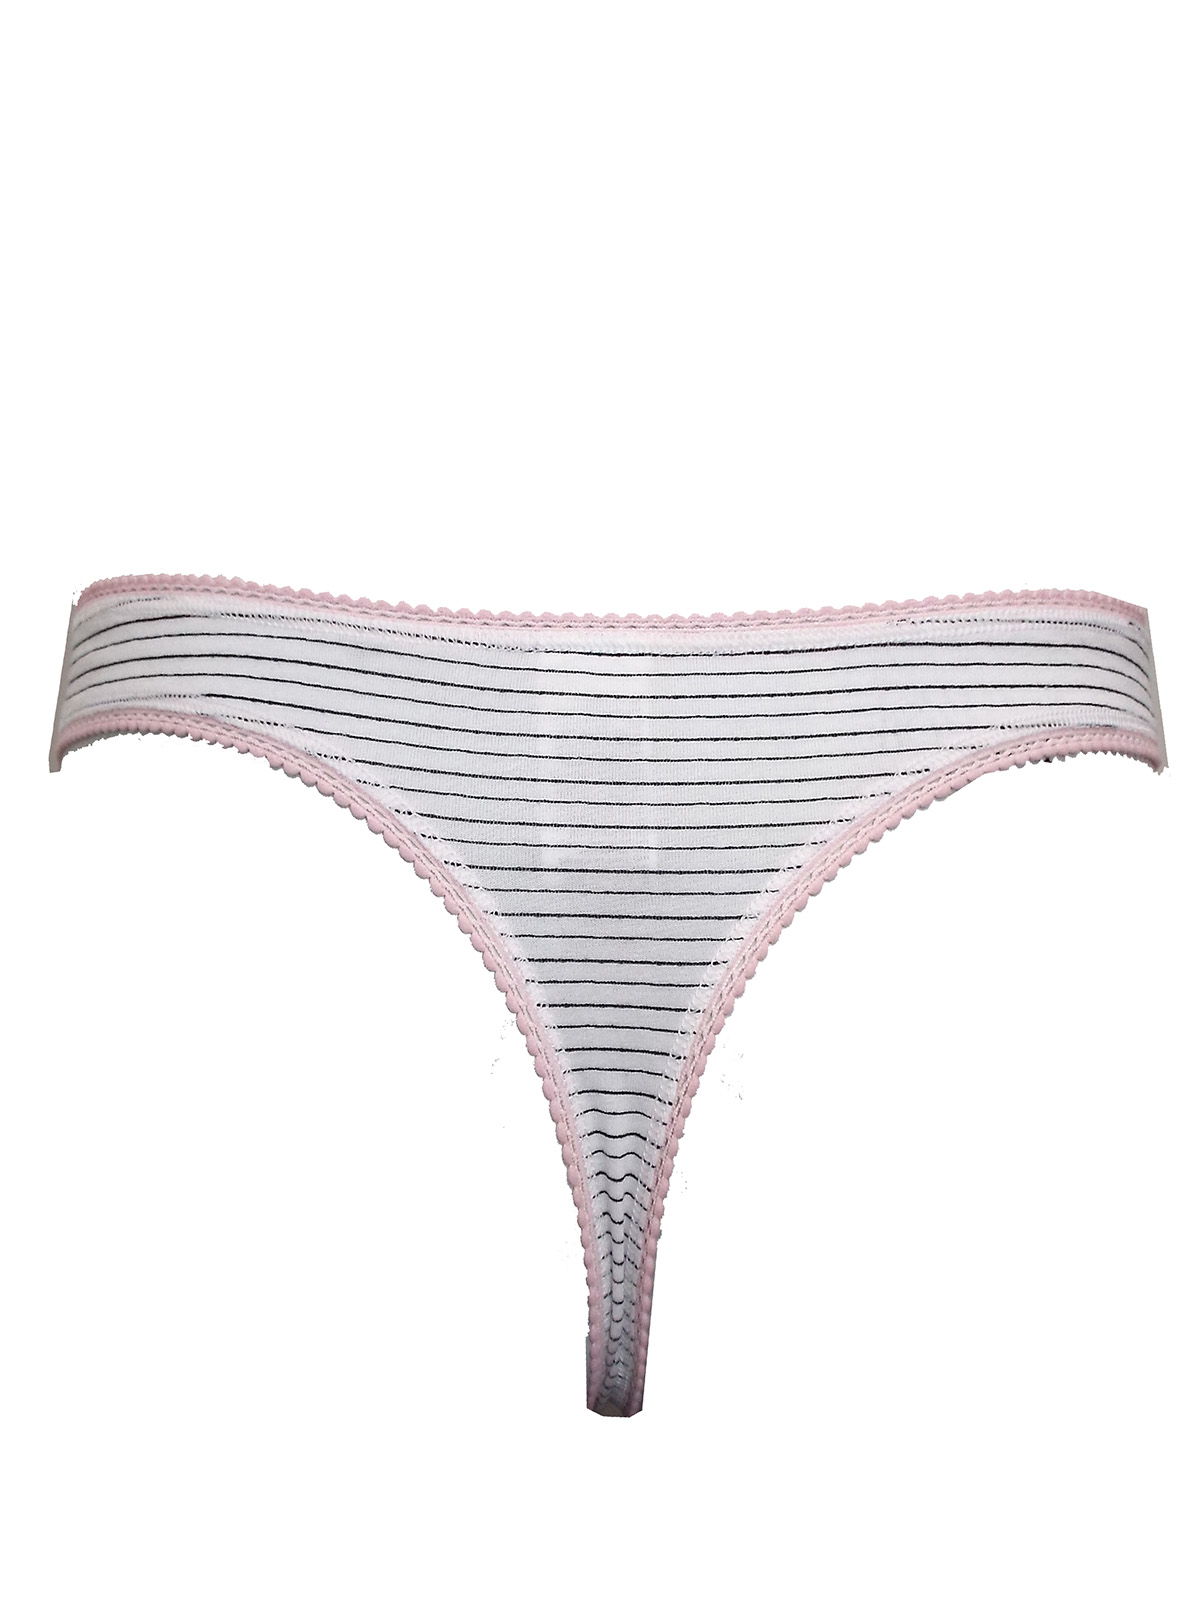 F&F - - F&F WHITE Striped Cotton Rich Low Rise Thong - Size 6 to 14